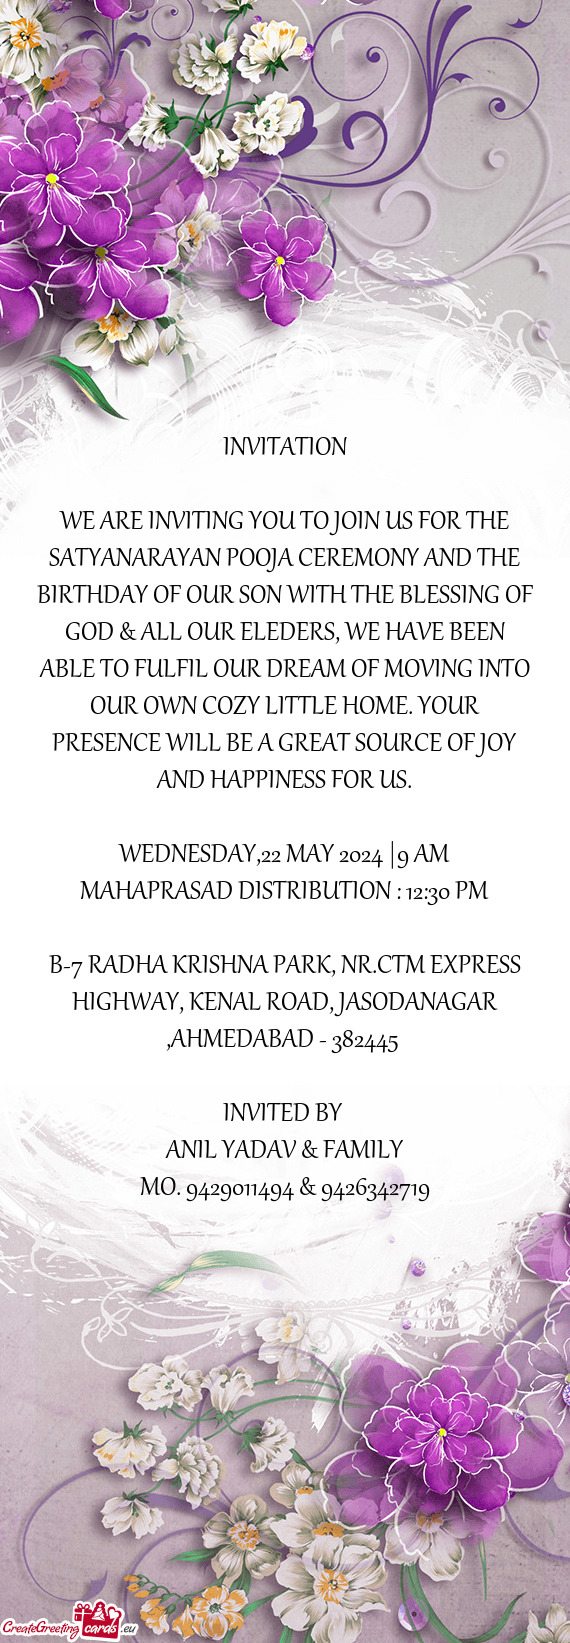 WE ARE INVITING YOU TO JOIN US FOR THE SATYANARAYAN POOJA CEREMONY AND THE BIRTHDAY OF OUR SON WITH